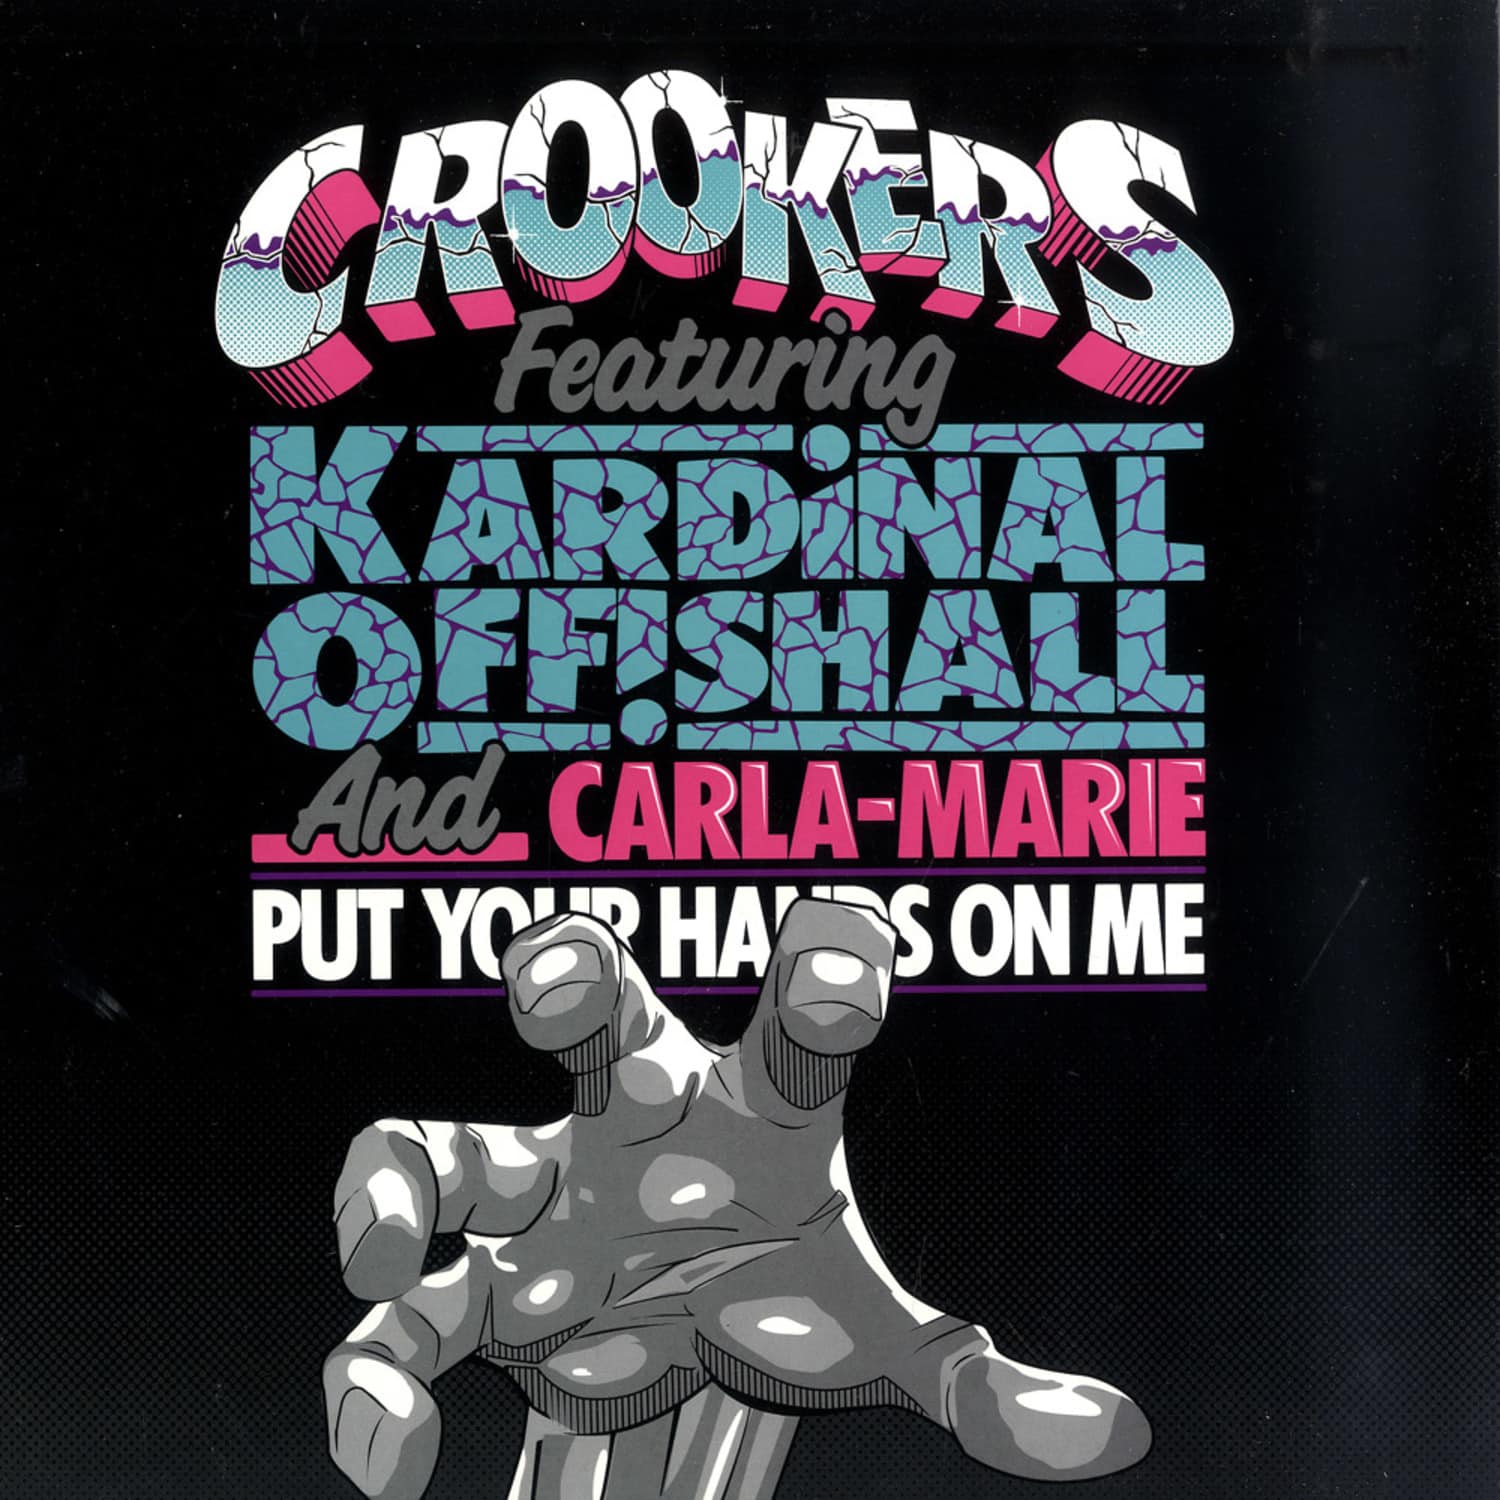 Crookers - PUT YOUR HANDS ON ME 